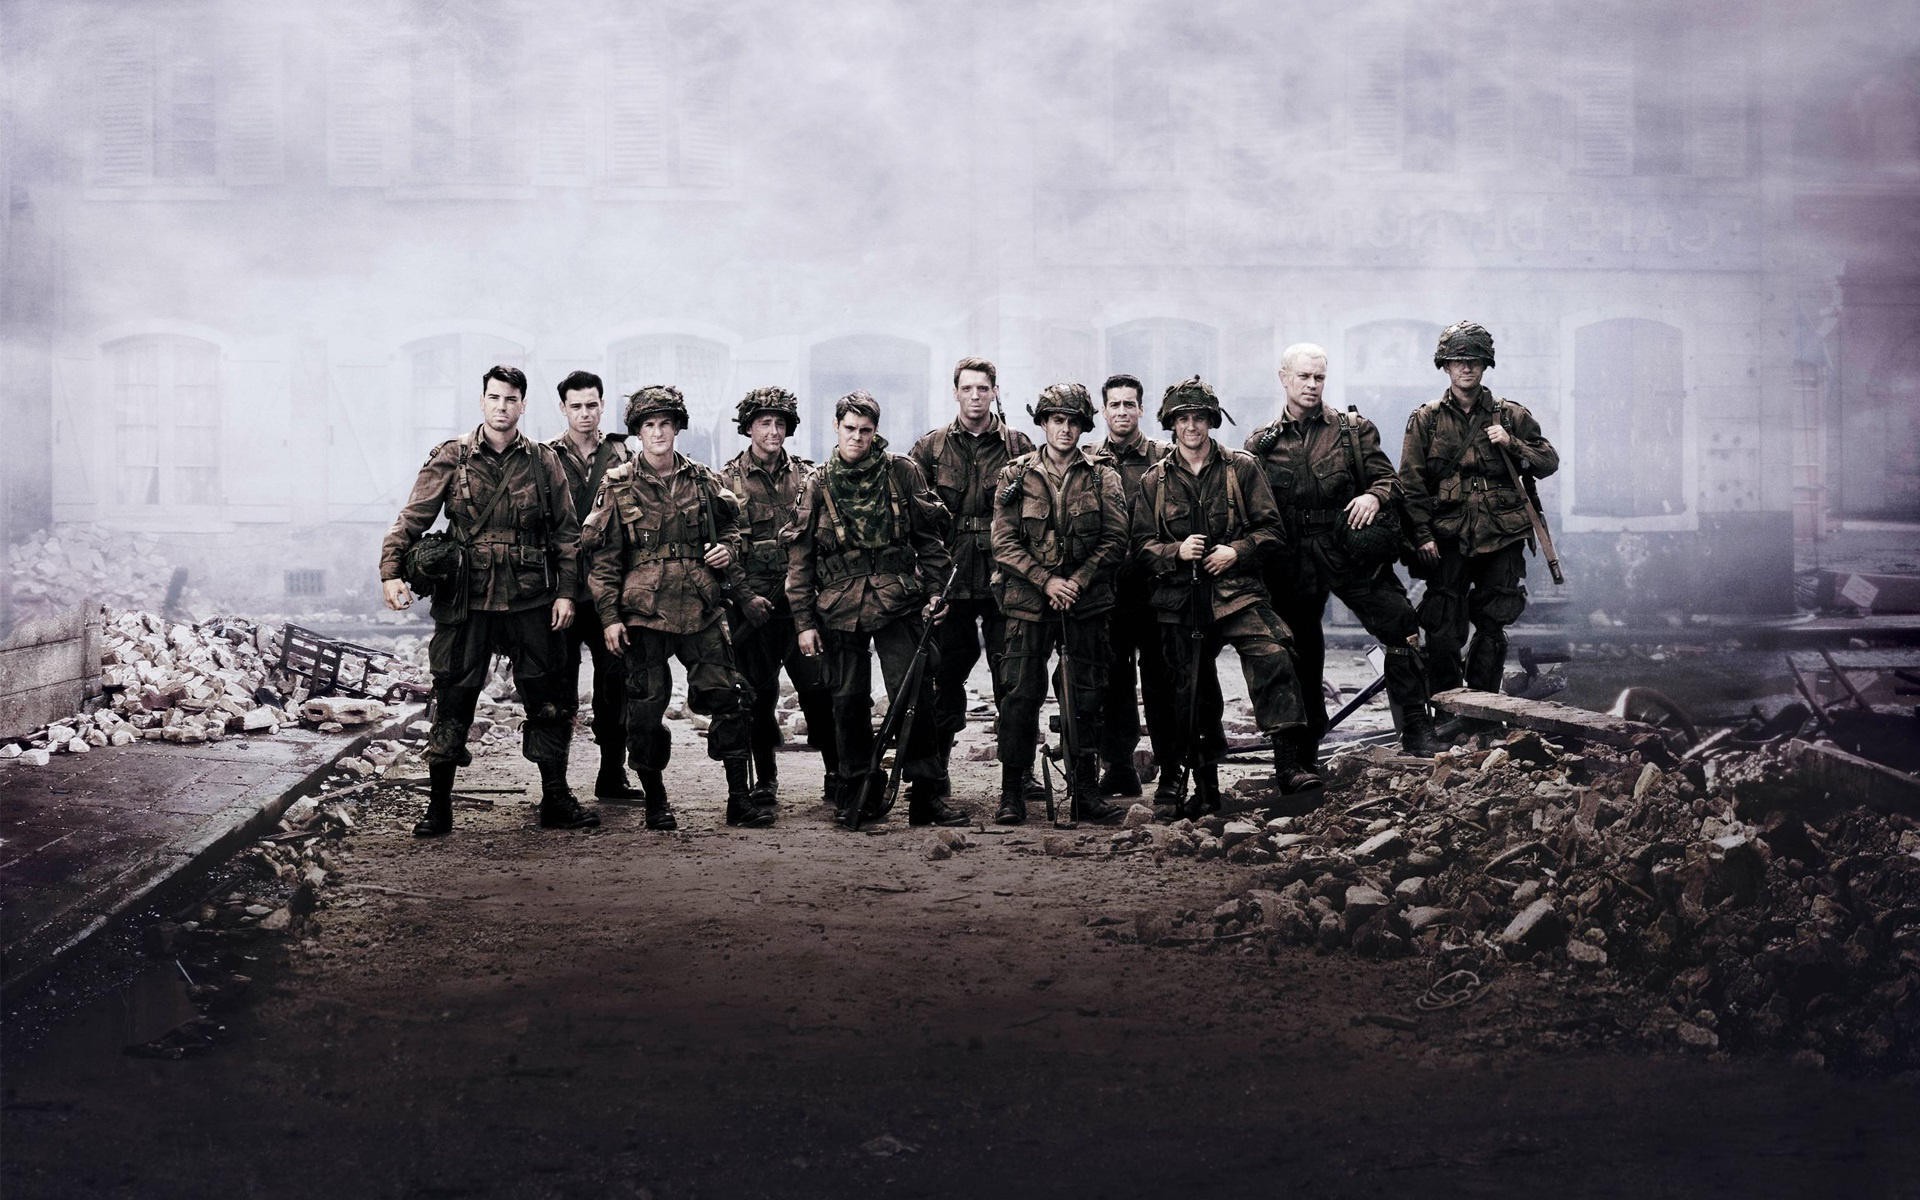 Band Of Brothers Backgrounds, Compatible - PC, Mobile, Gadgets| 1920x1200 px